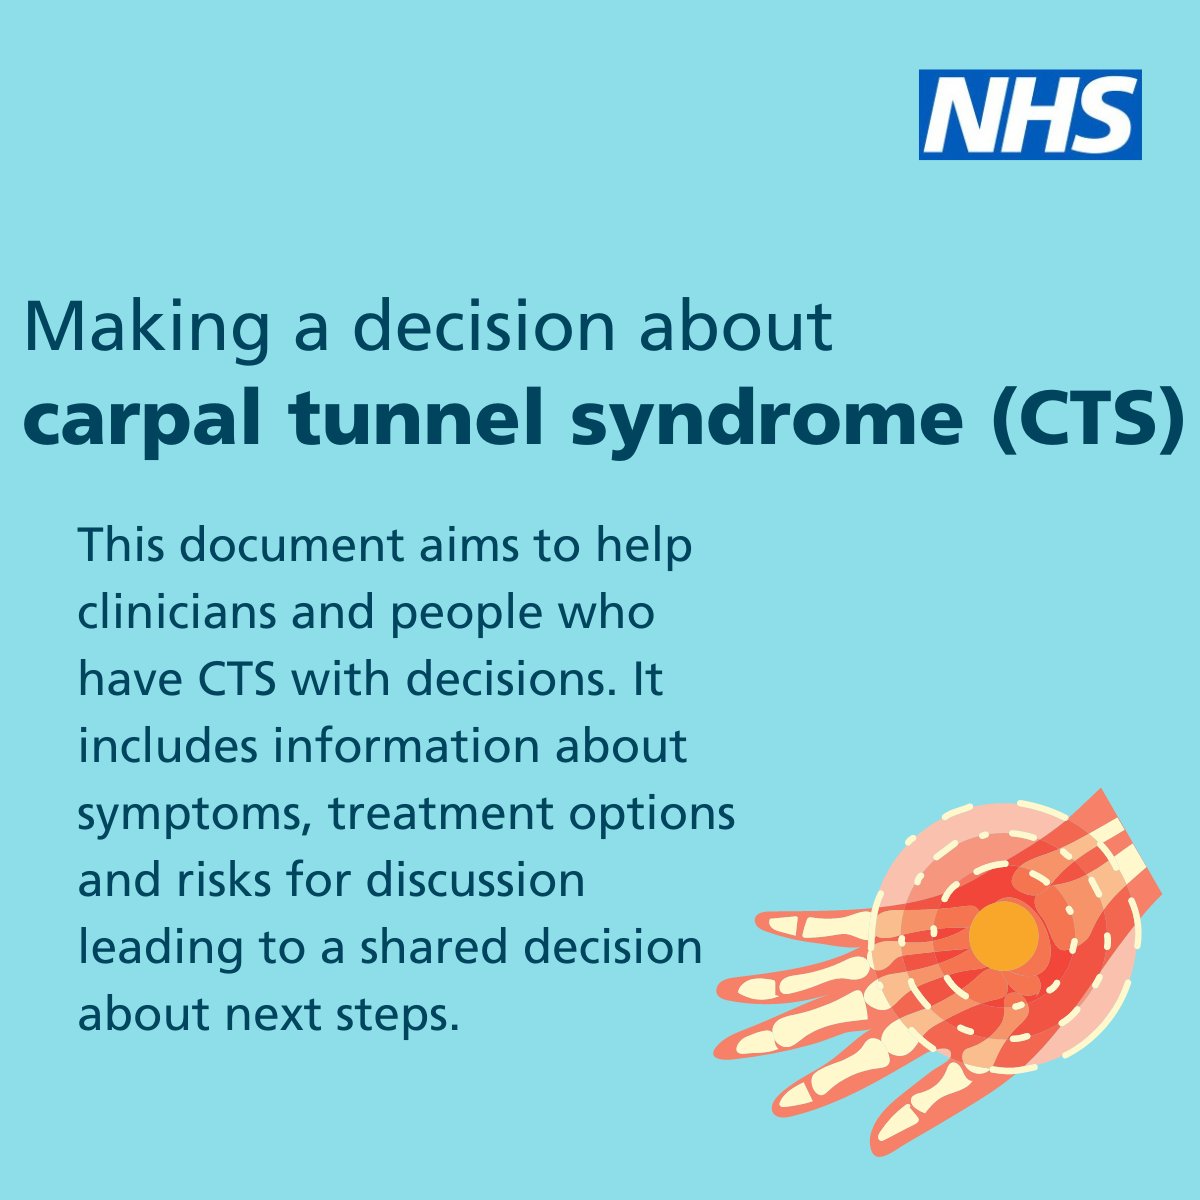 Carpal tunnel syndrome (CTS) decision support tool supports #SharedDecisionMaking conversations between clinician and patient by explaining treatment, care and support options to help the patient consider what matters most to them.

england.nhs.uk/decision-suppo…

#BestMSKHealth